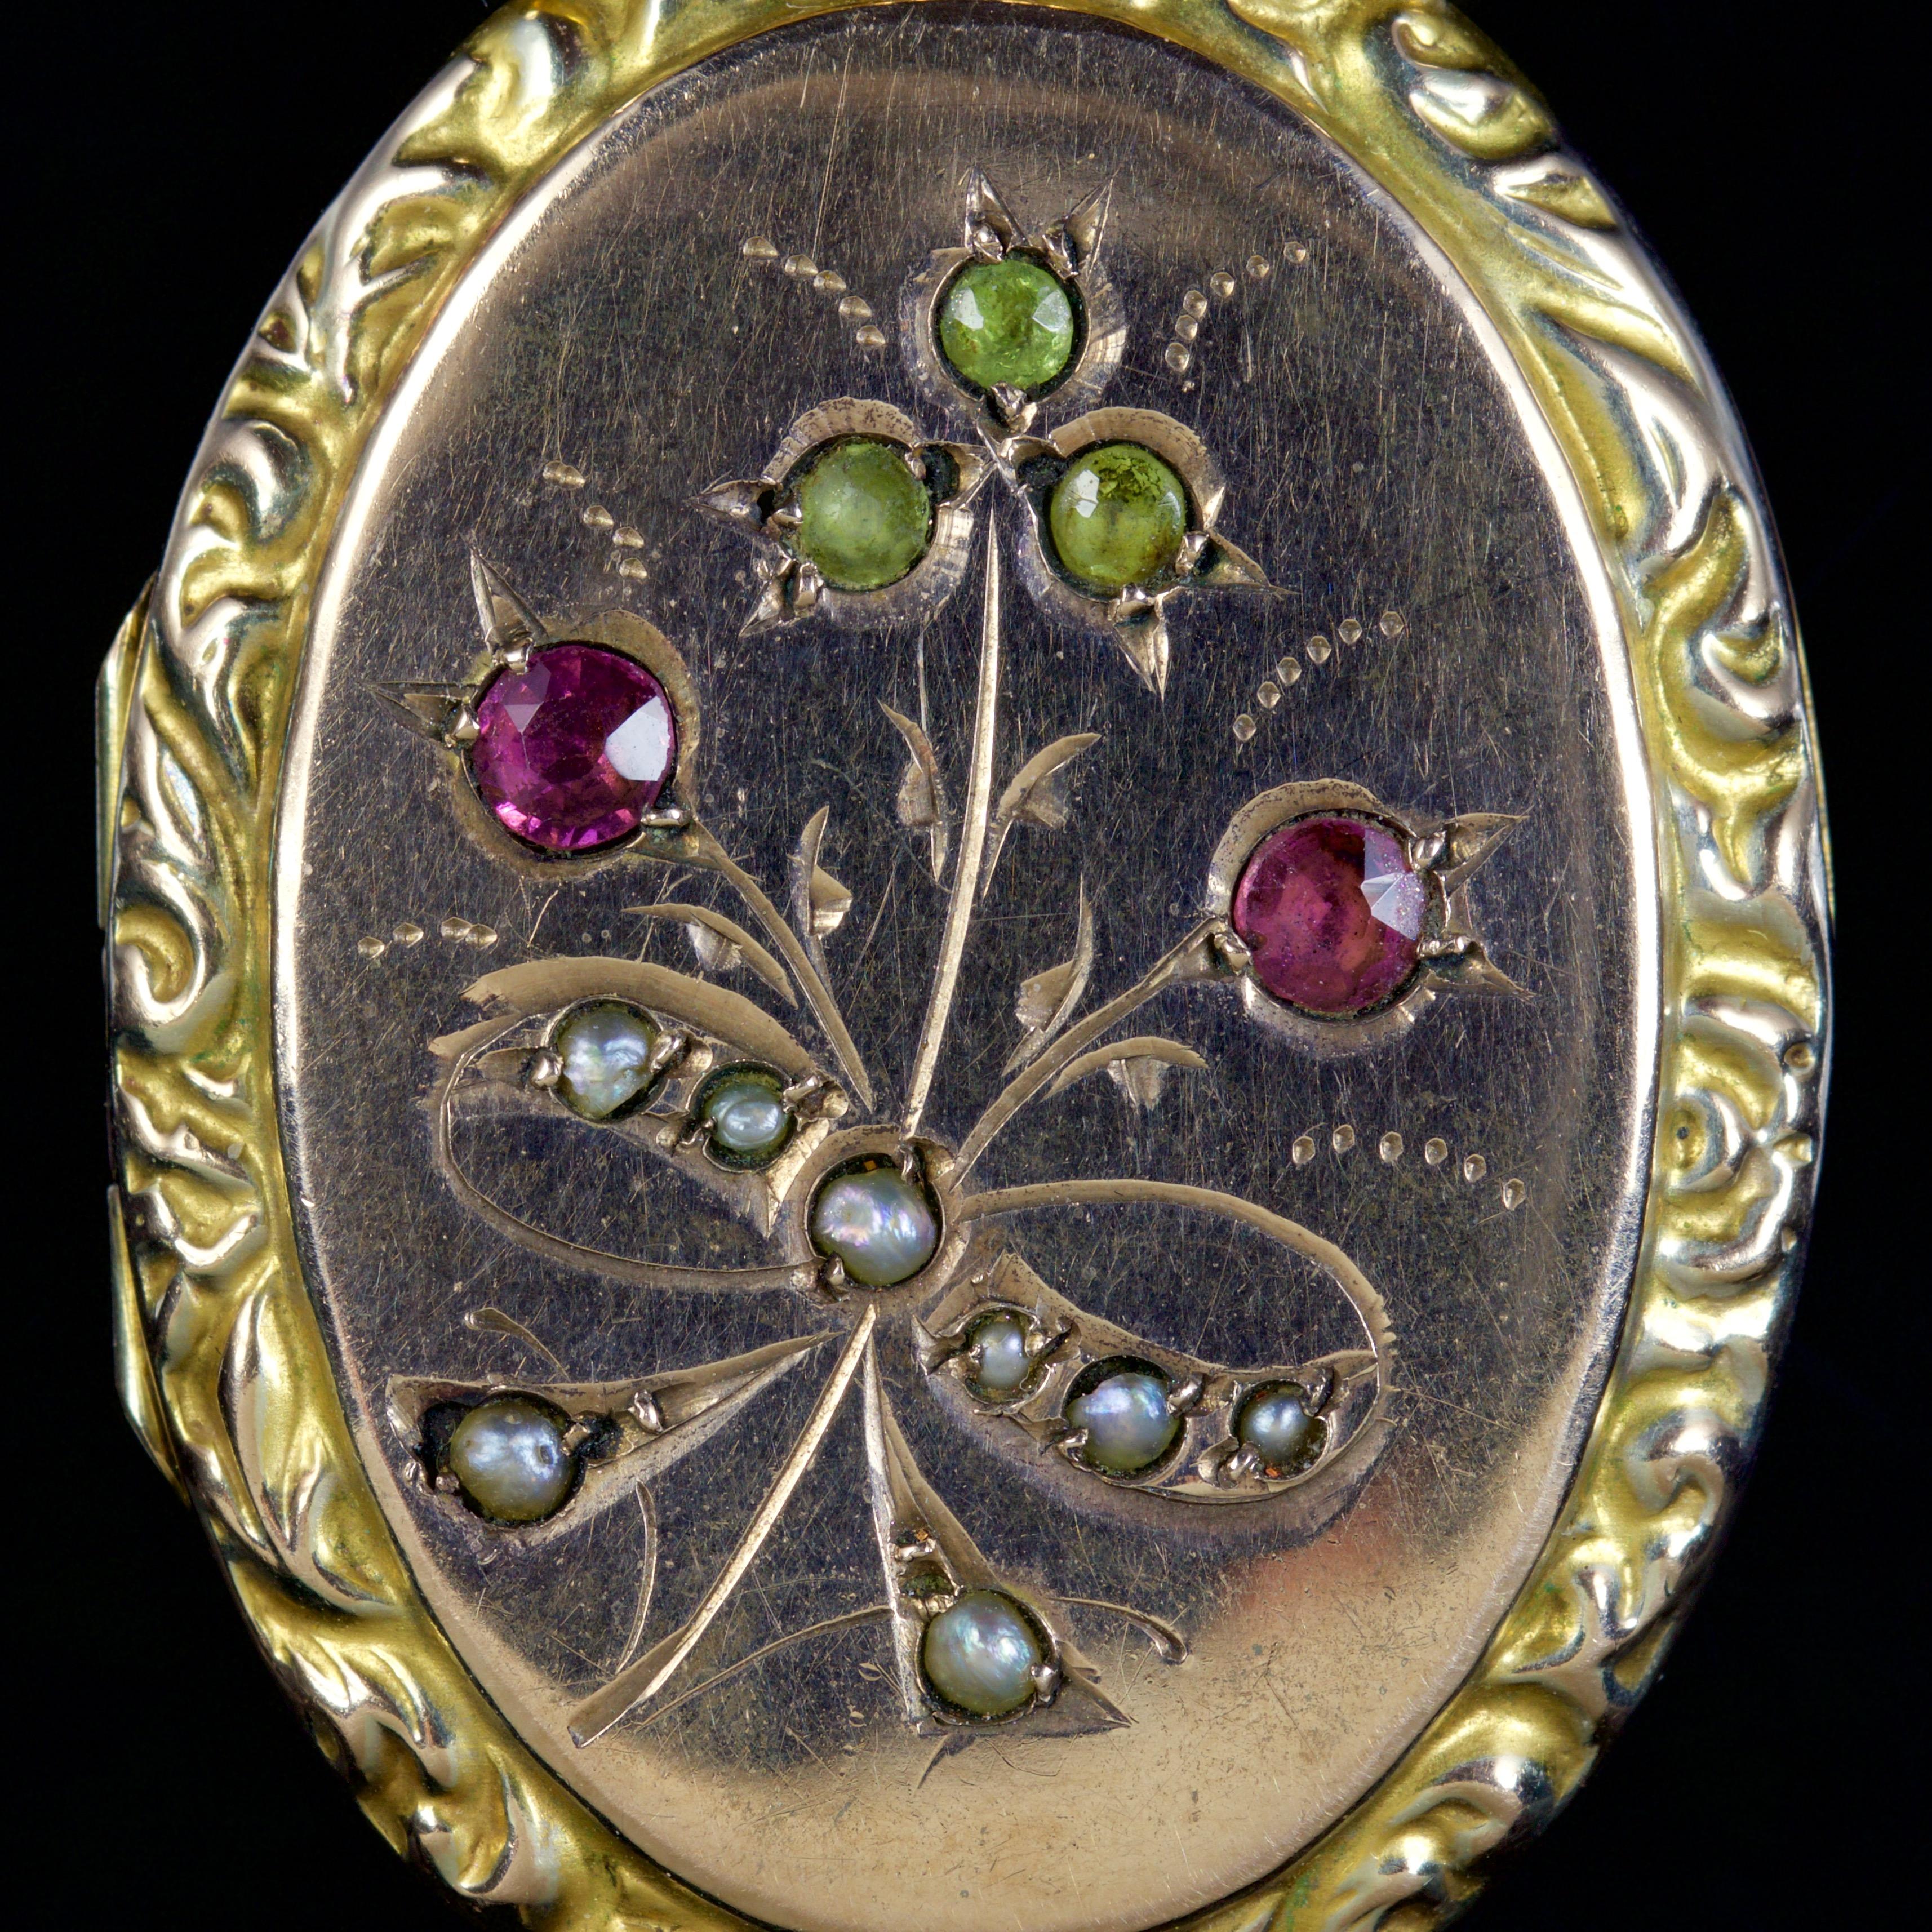 This beautiful Victorian Suffragette locket is set in 9ct Gold, Circa 1900.

The locket shows beautiful details, boasting Peridots, Amethyst and Pearls which represent the Suffragette movement.

The Peridot is a stone of lightness and beauty and was